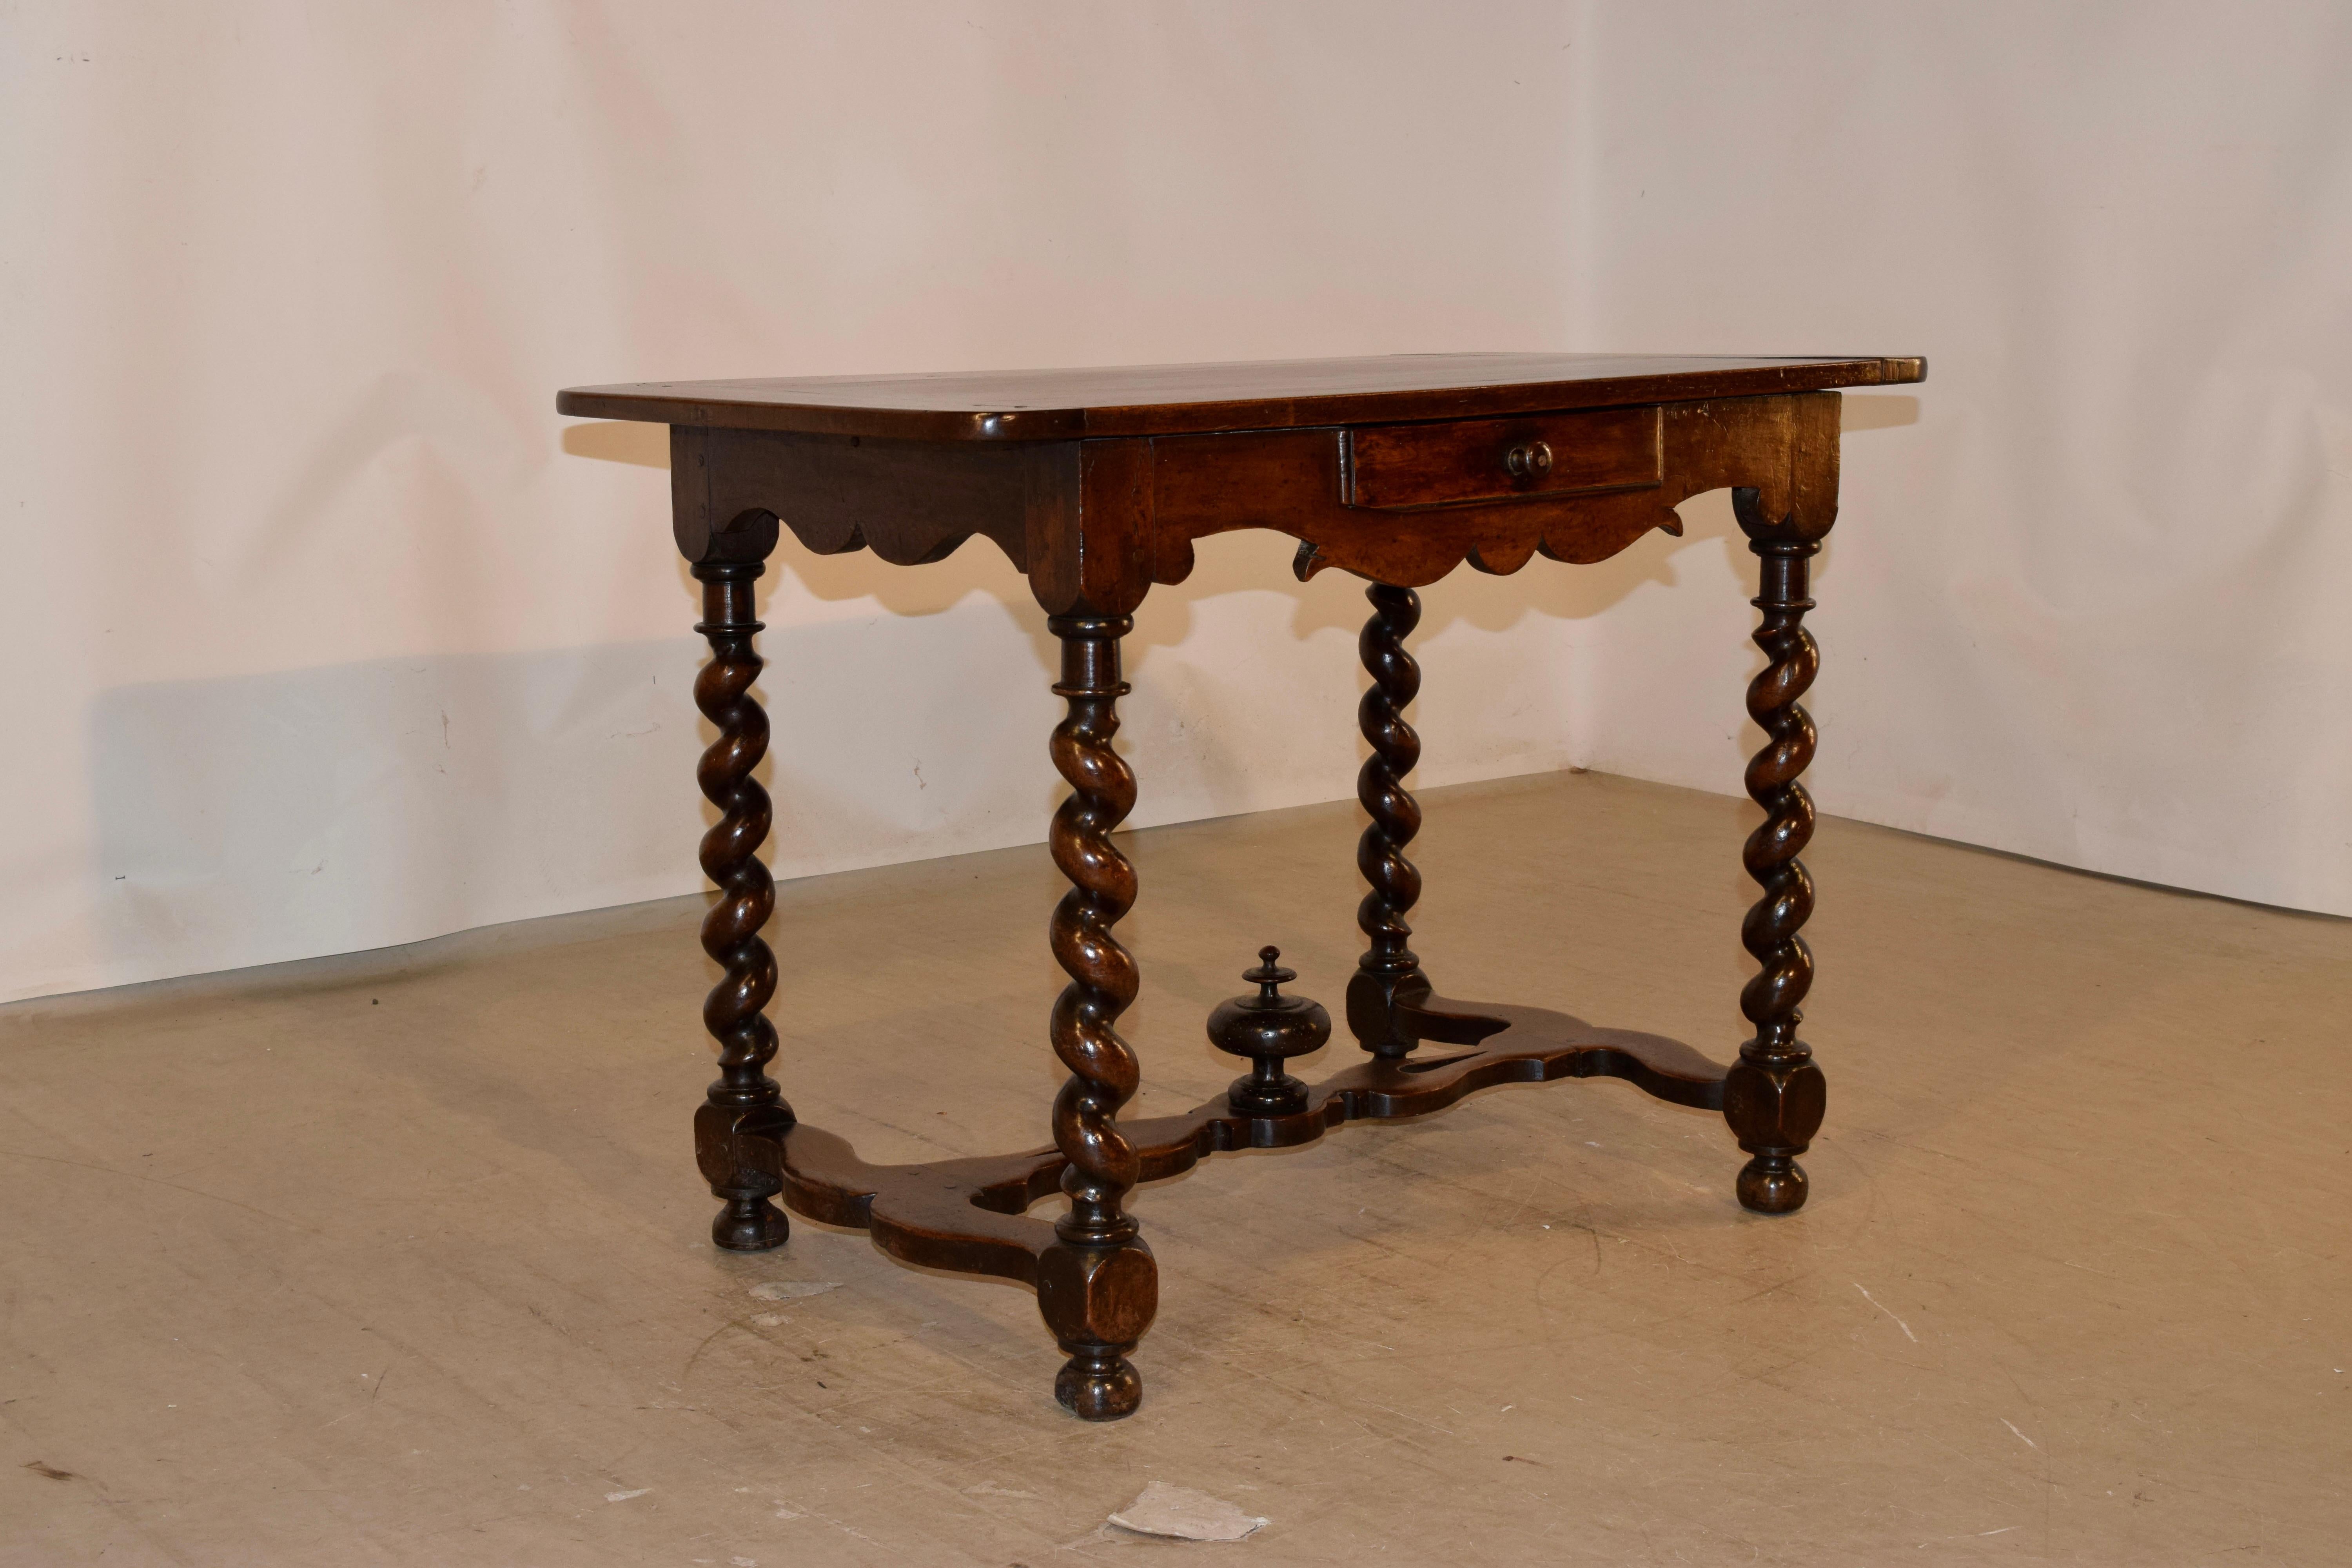 Mid-18th-century walnut side table from France with banded ends on the top, over wonderfully hand scalloped aprons on three sides and a single drawer in the front. The table is finished on all four sides for easy placement in any room. The table is